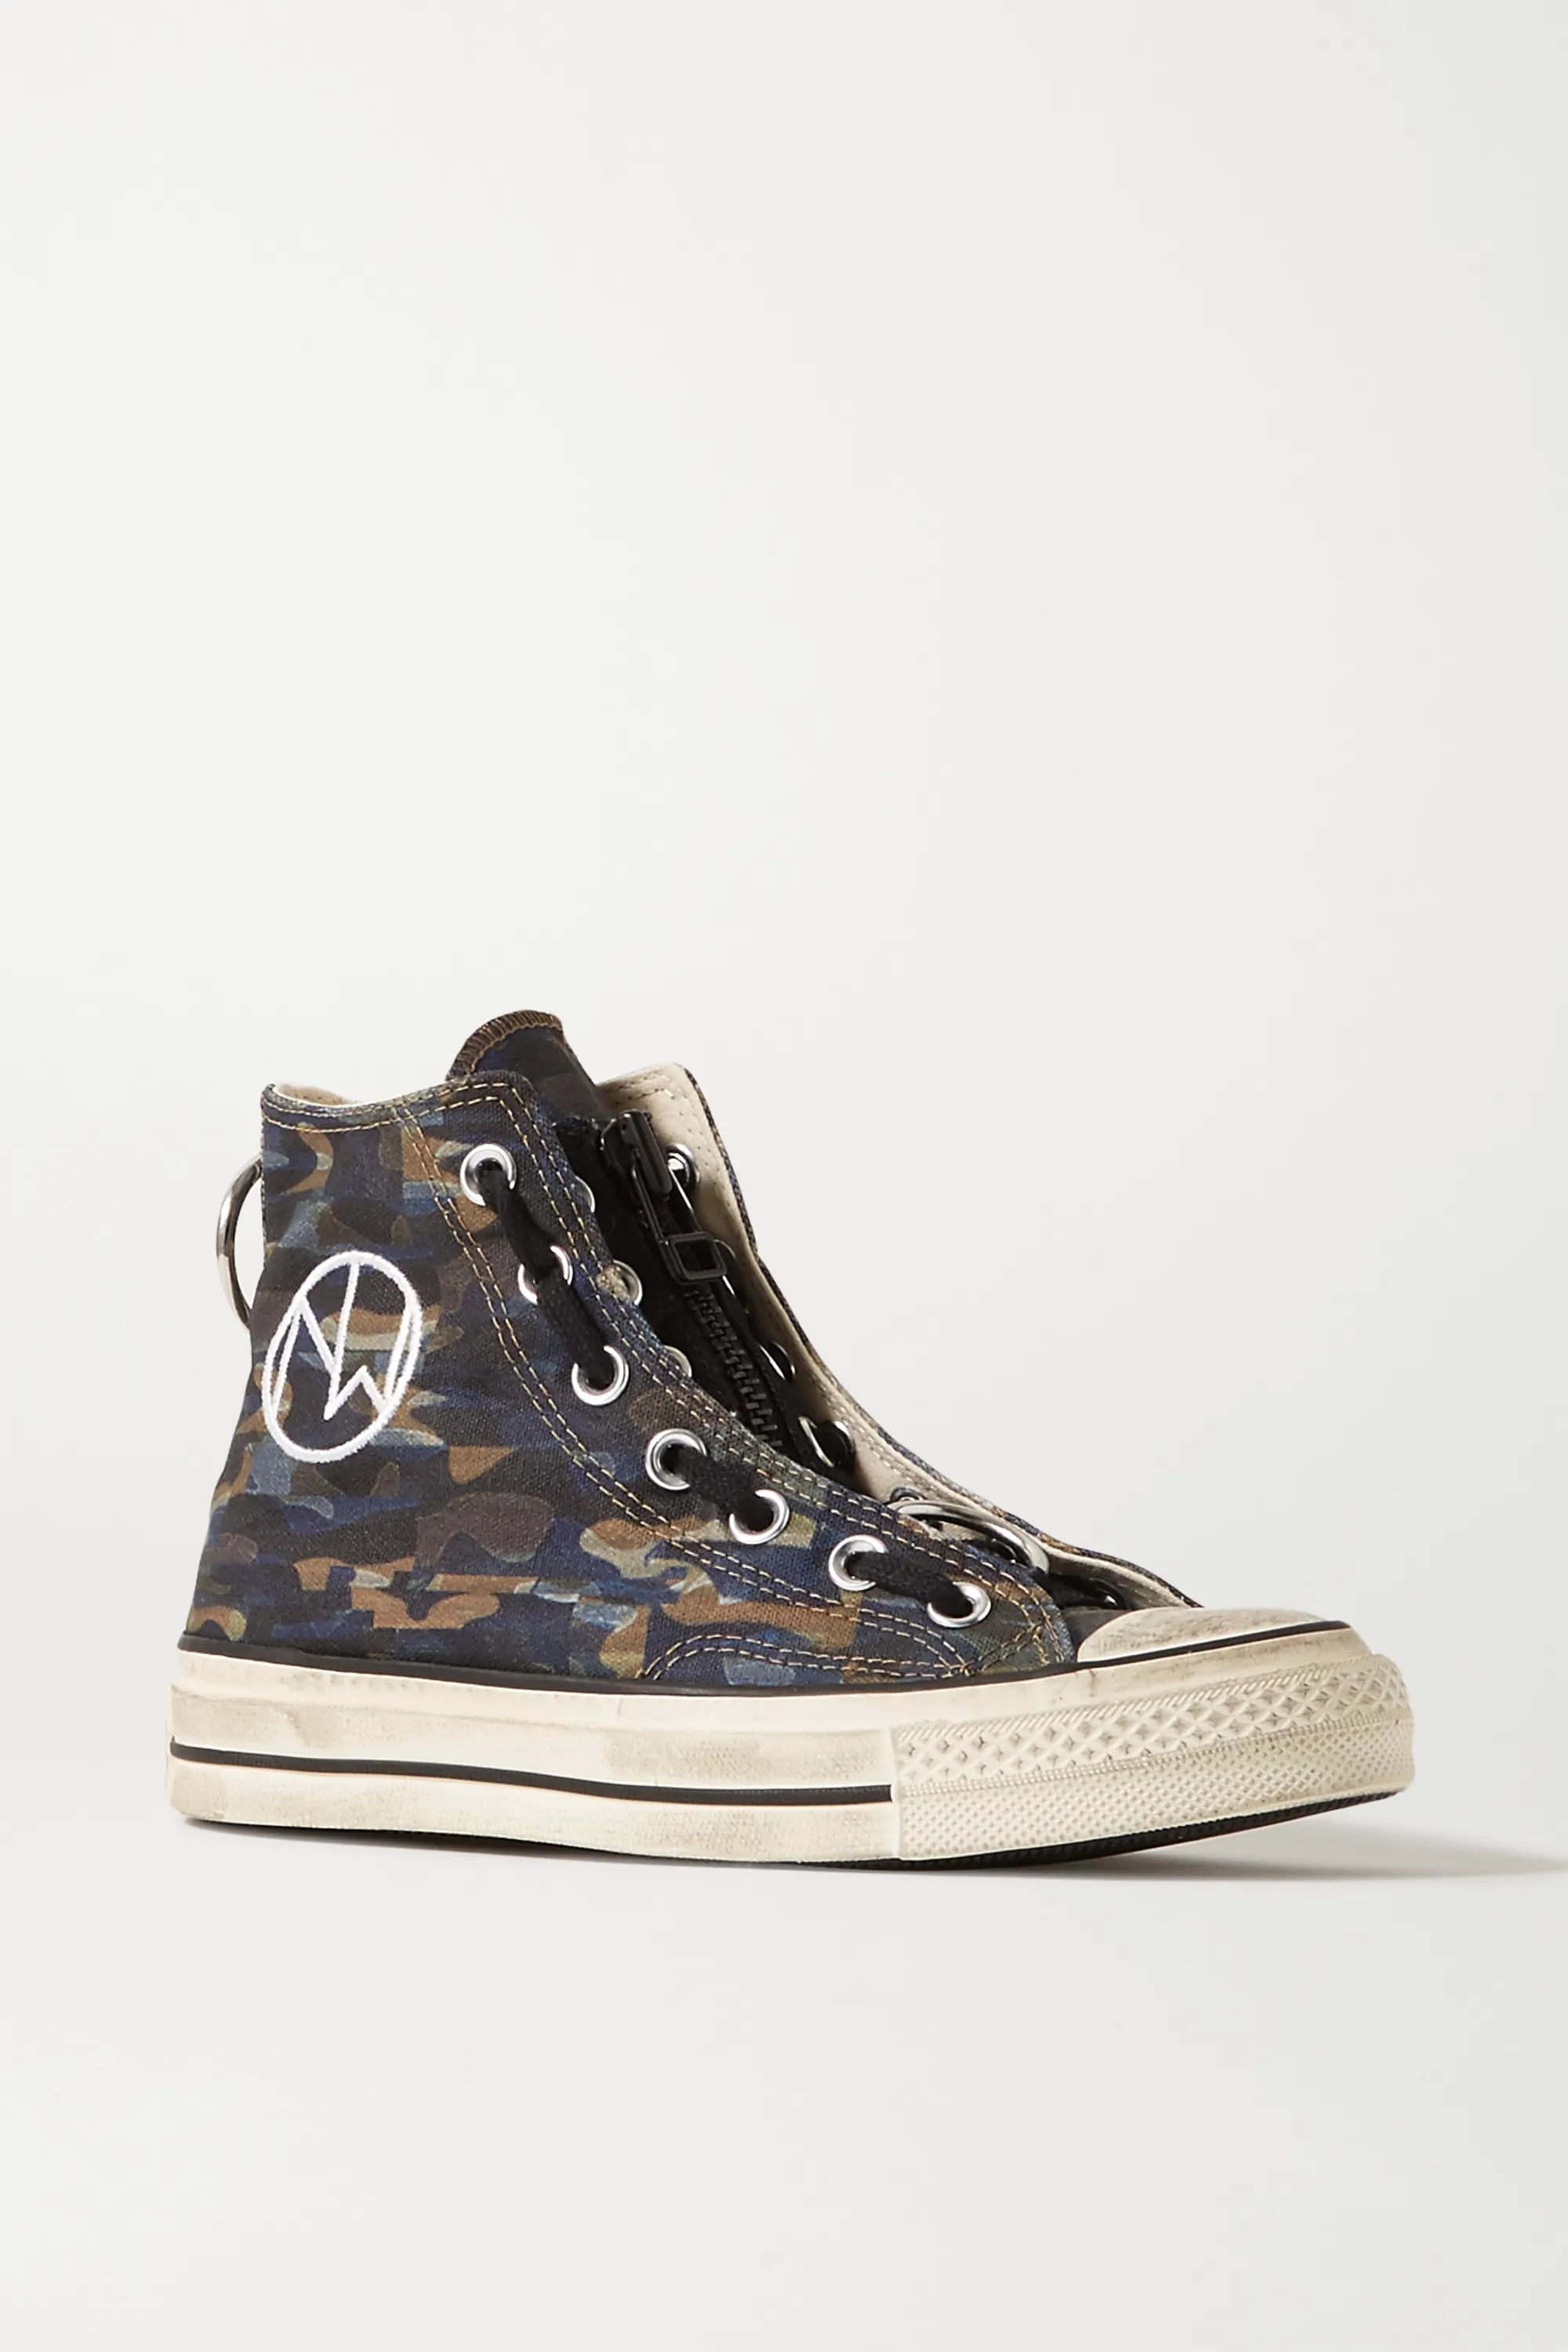 + Undercover Chuck Taylor All Star 70 embellished camouflage-print canvas high-top sneakers | NET-A-PORTER (US)